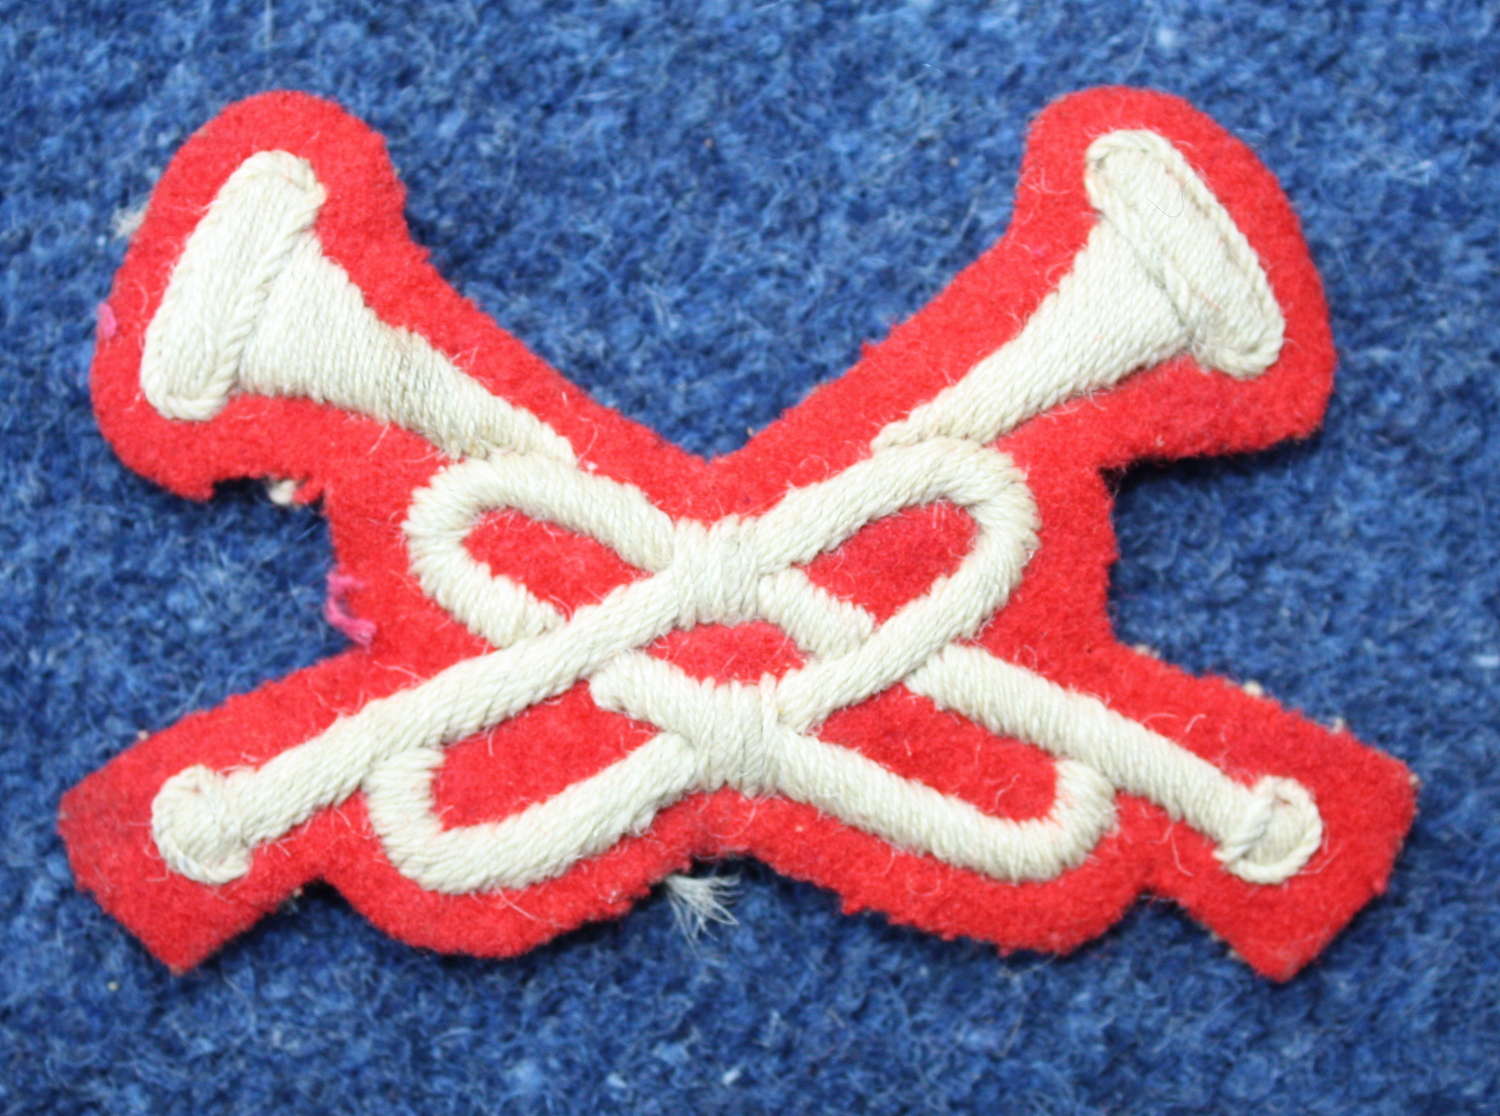 British Army Victorian Infantry Bugler Trade Badge Patch Insignia